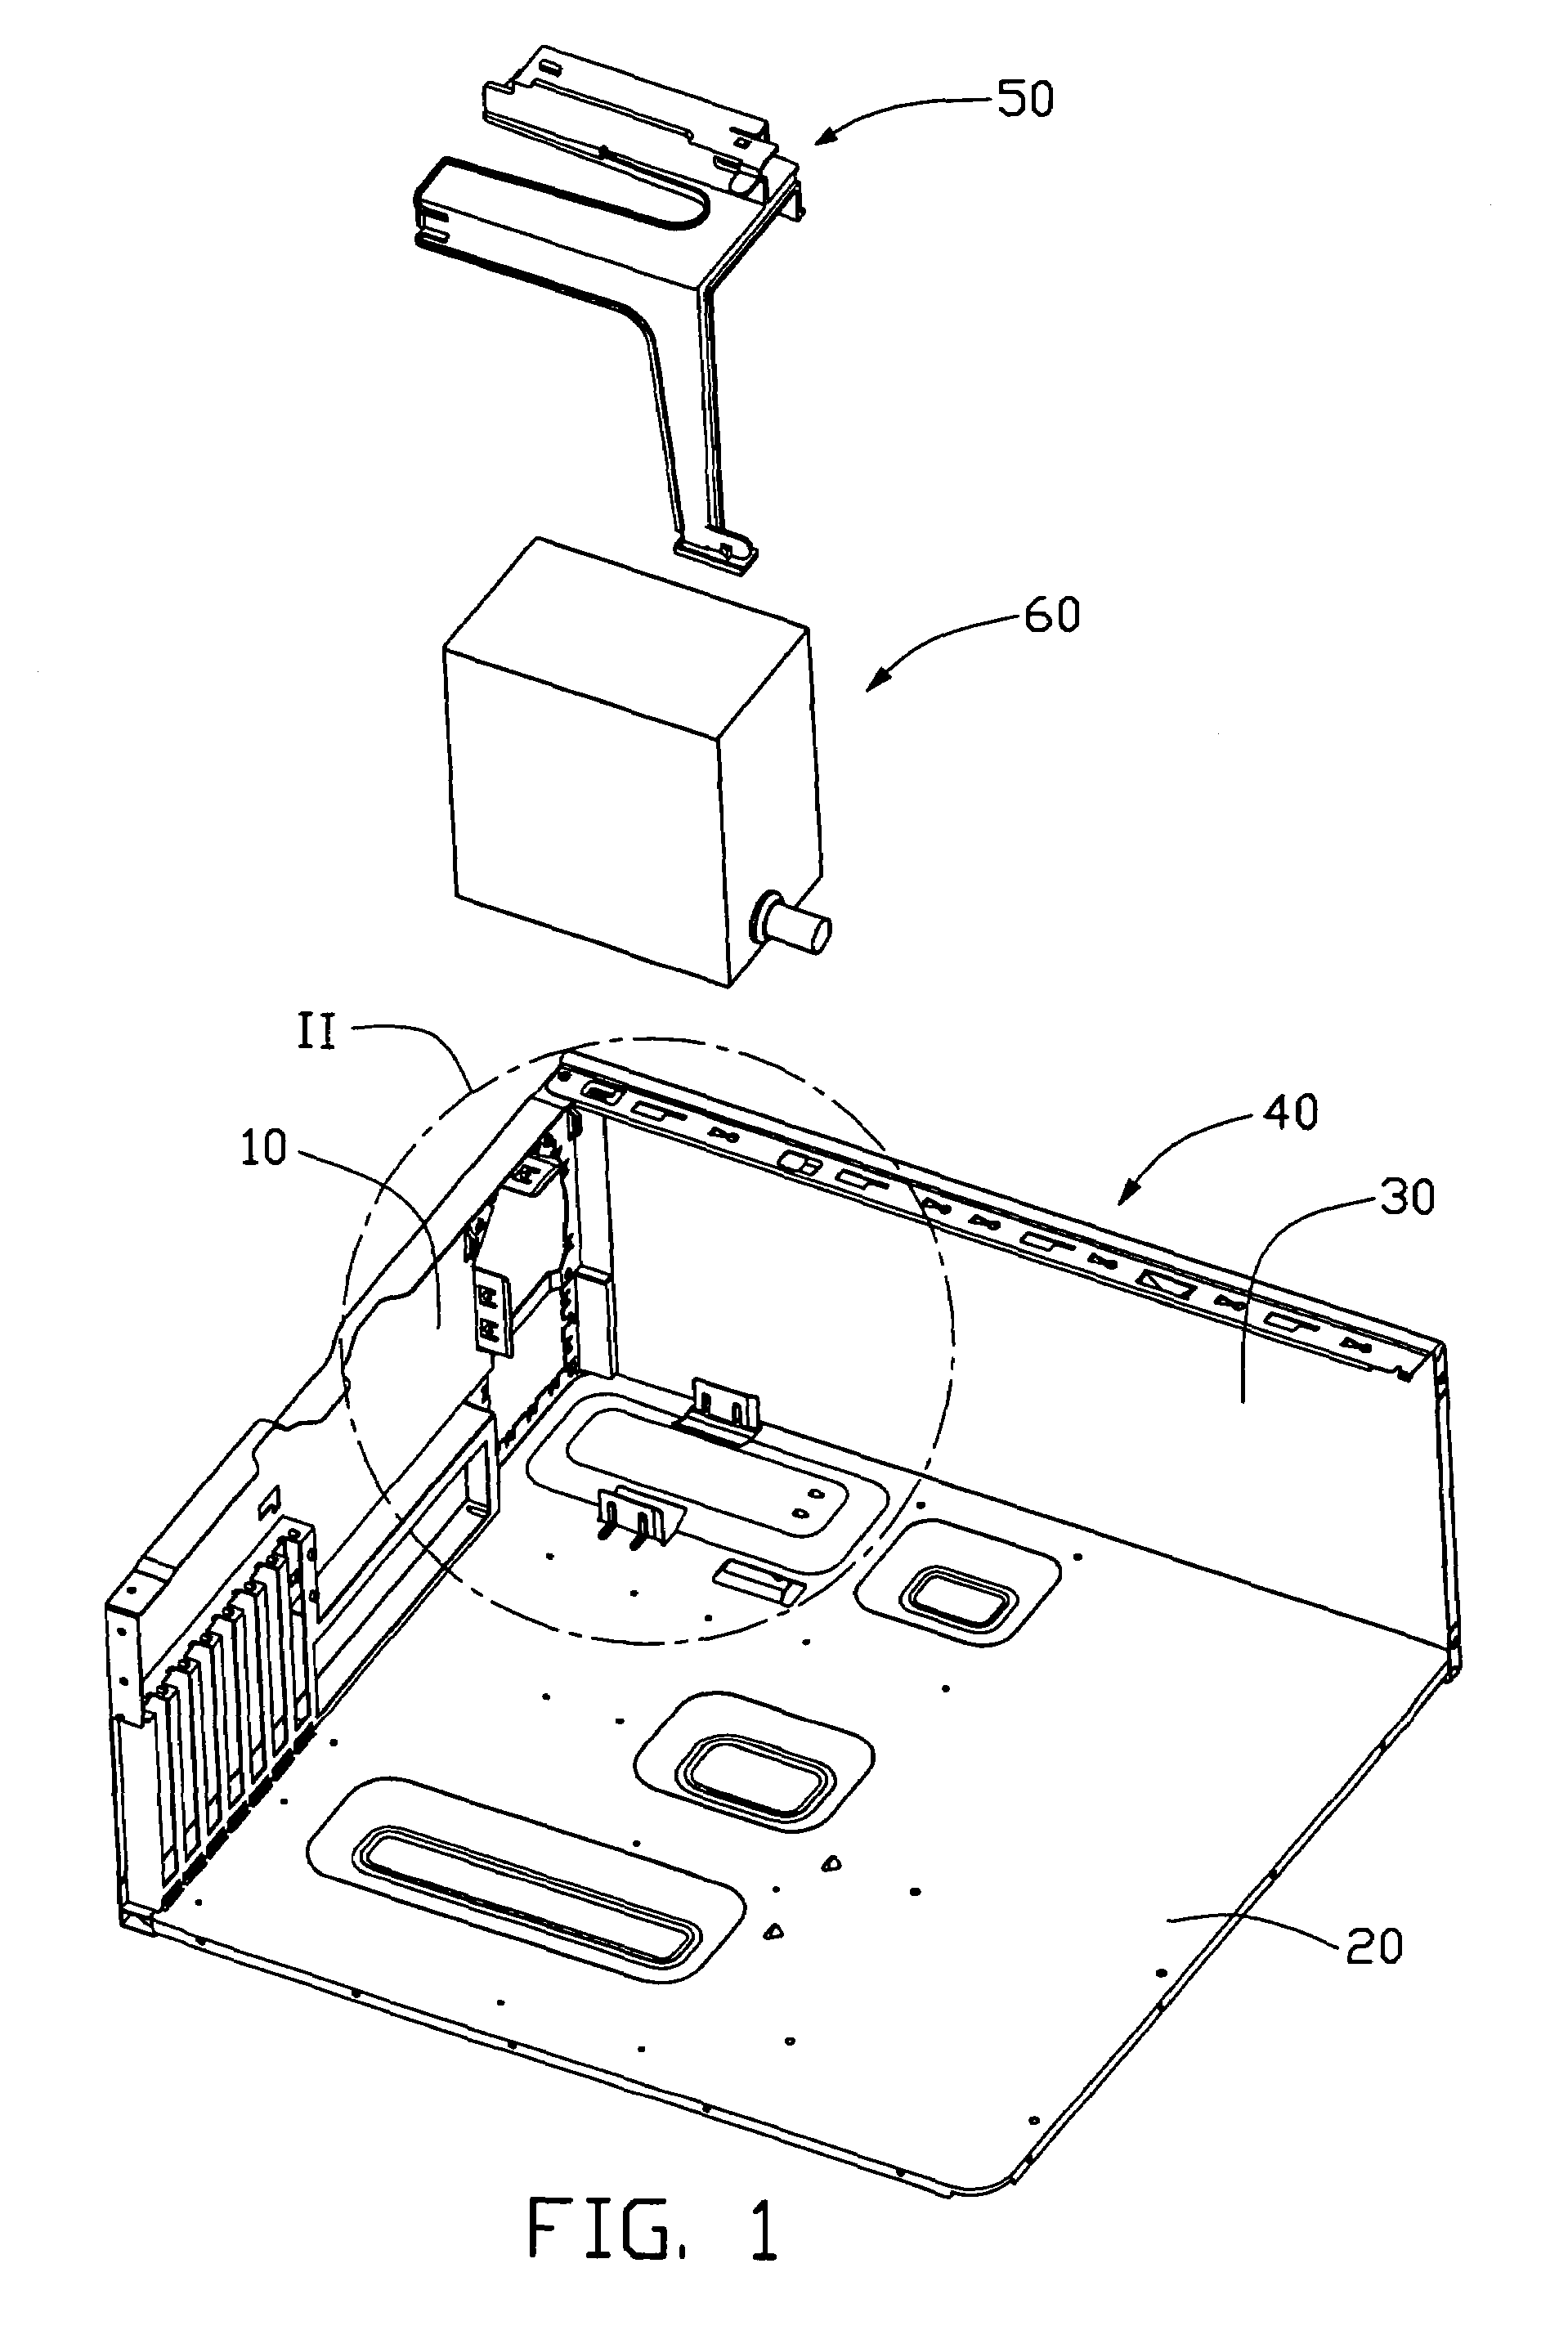 Computer enclosure with power supply bracket